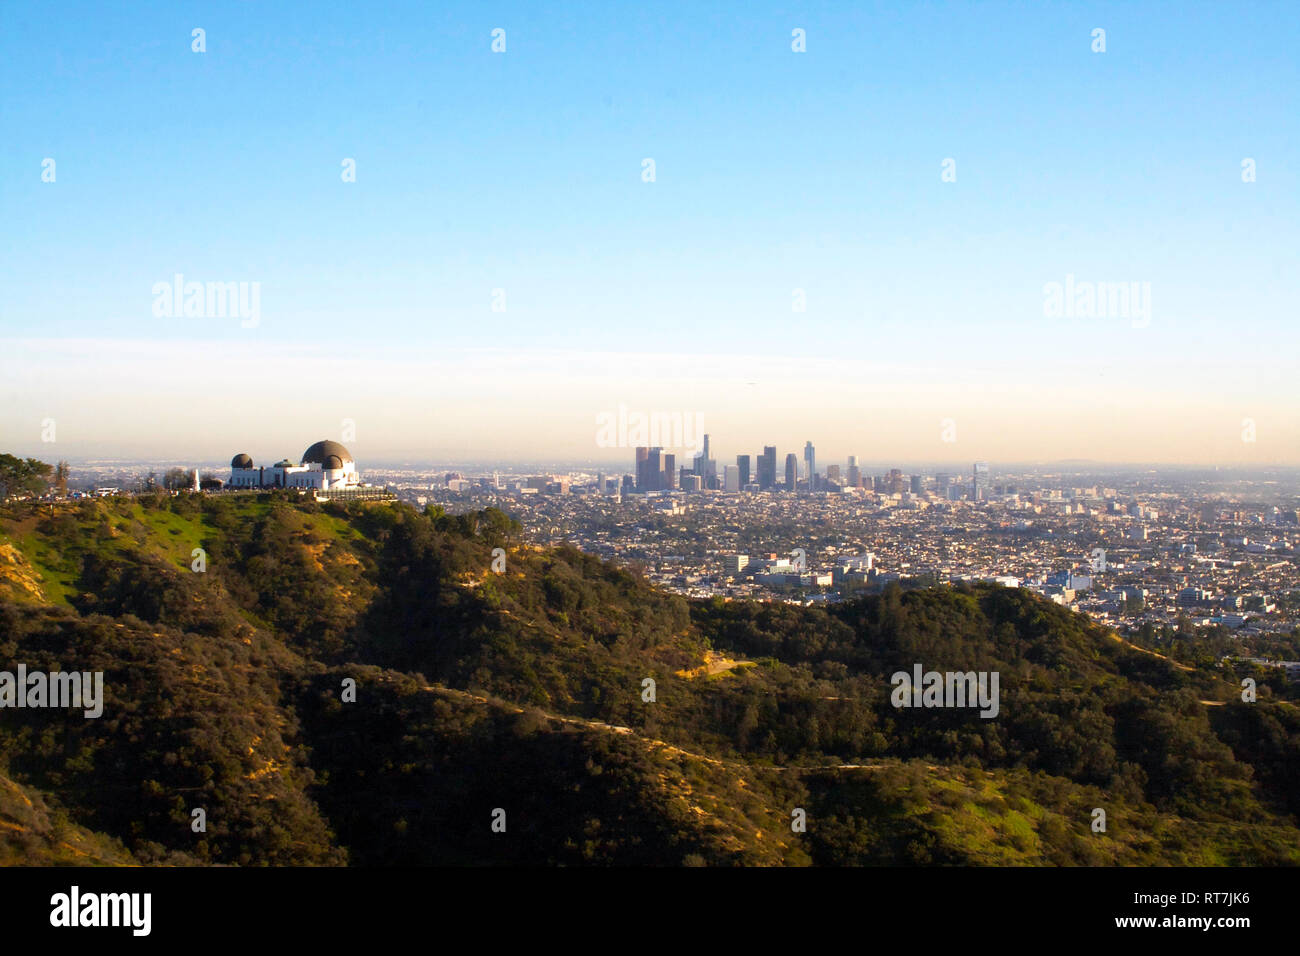 View of Los Angeles from Griffith Park, California Stock Photo